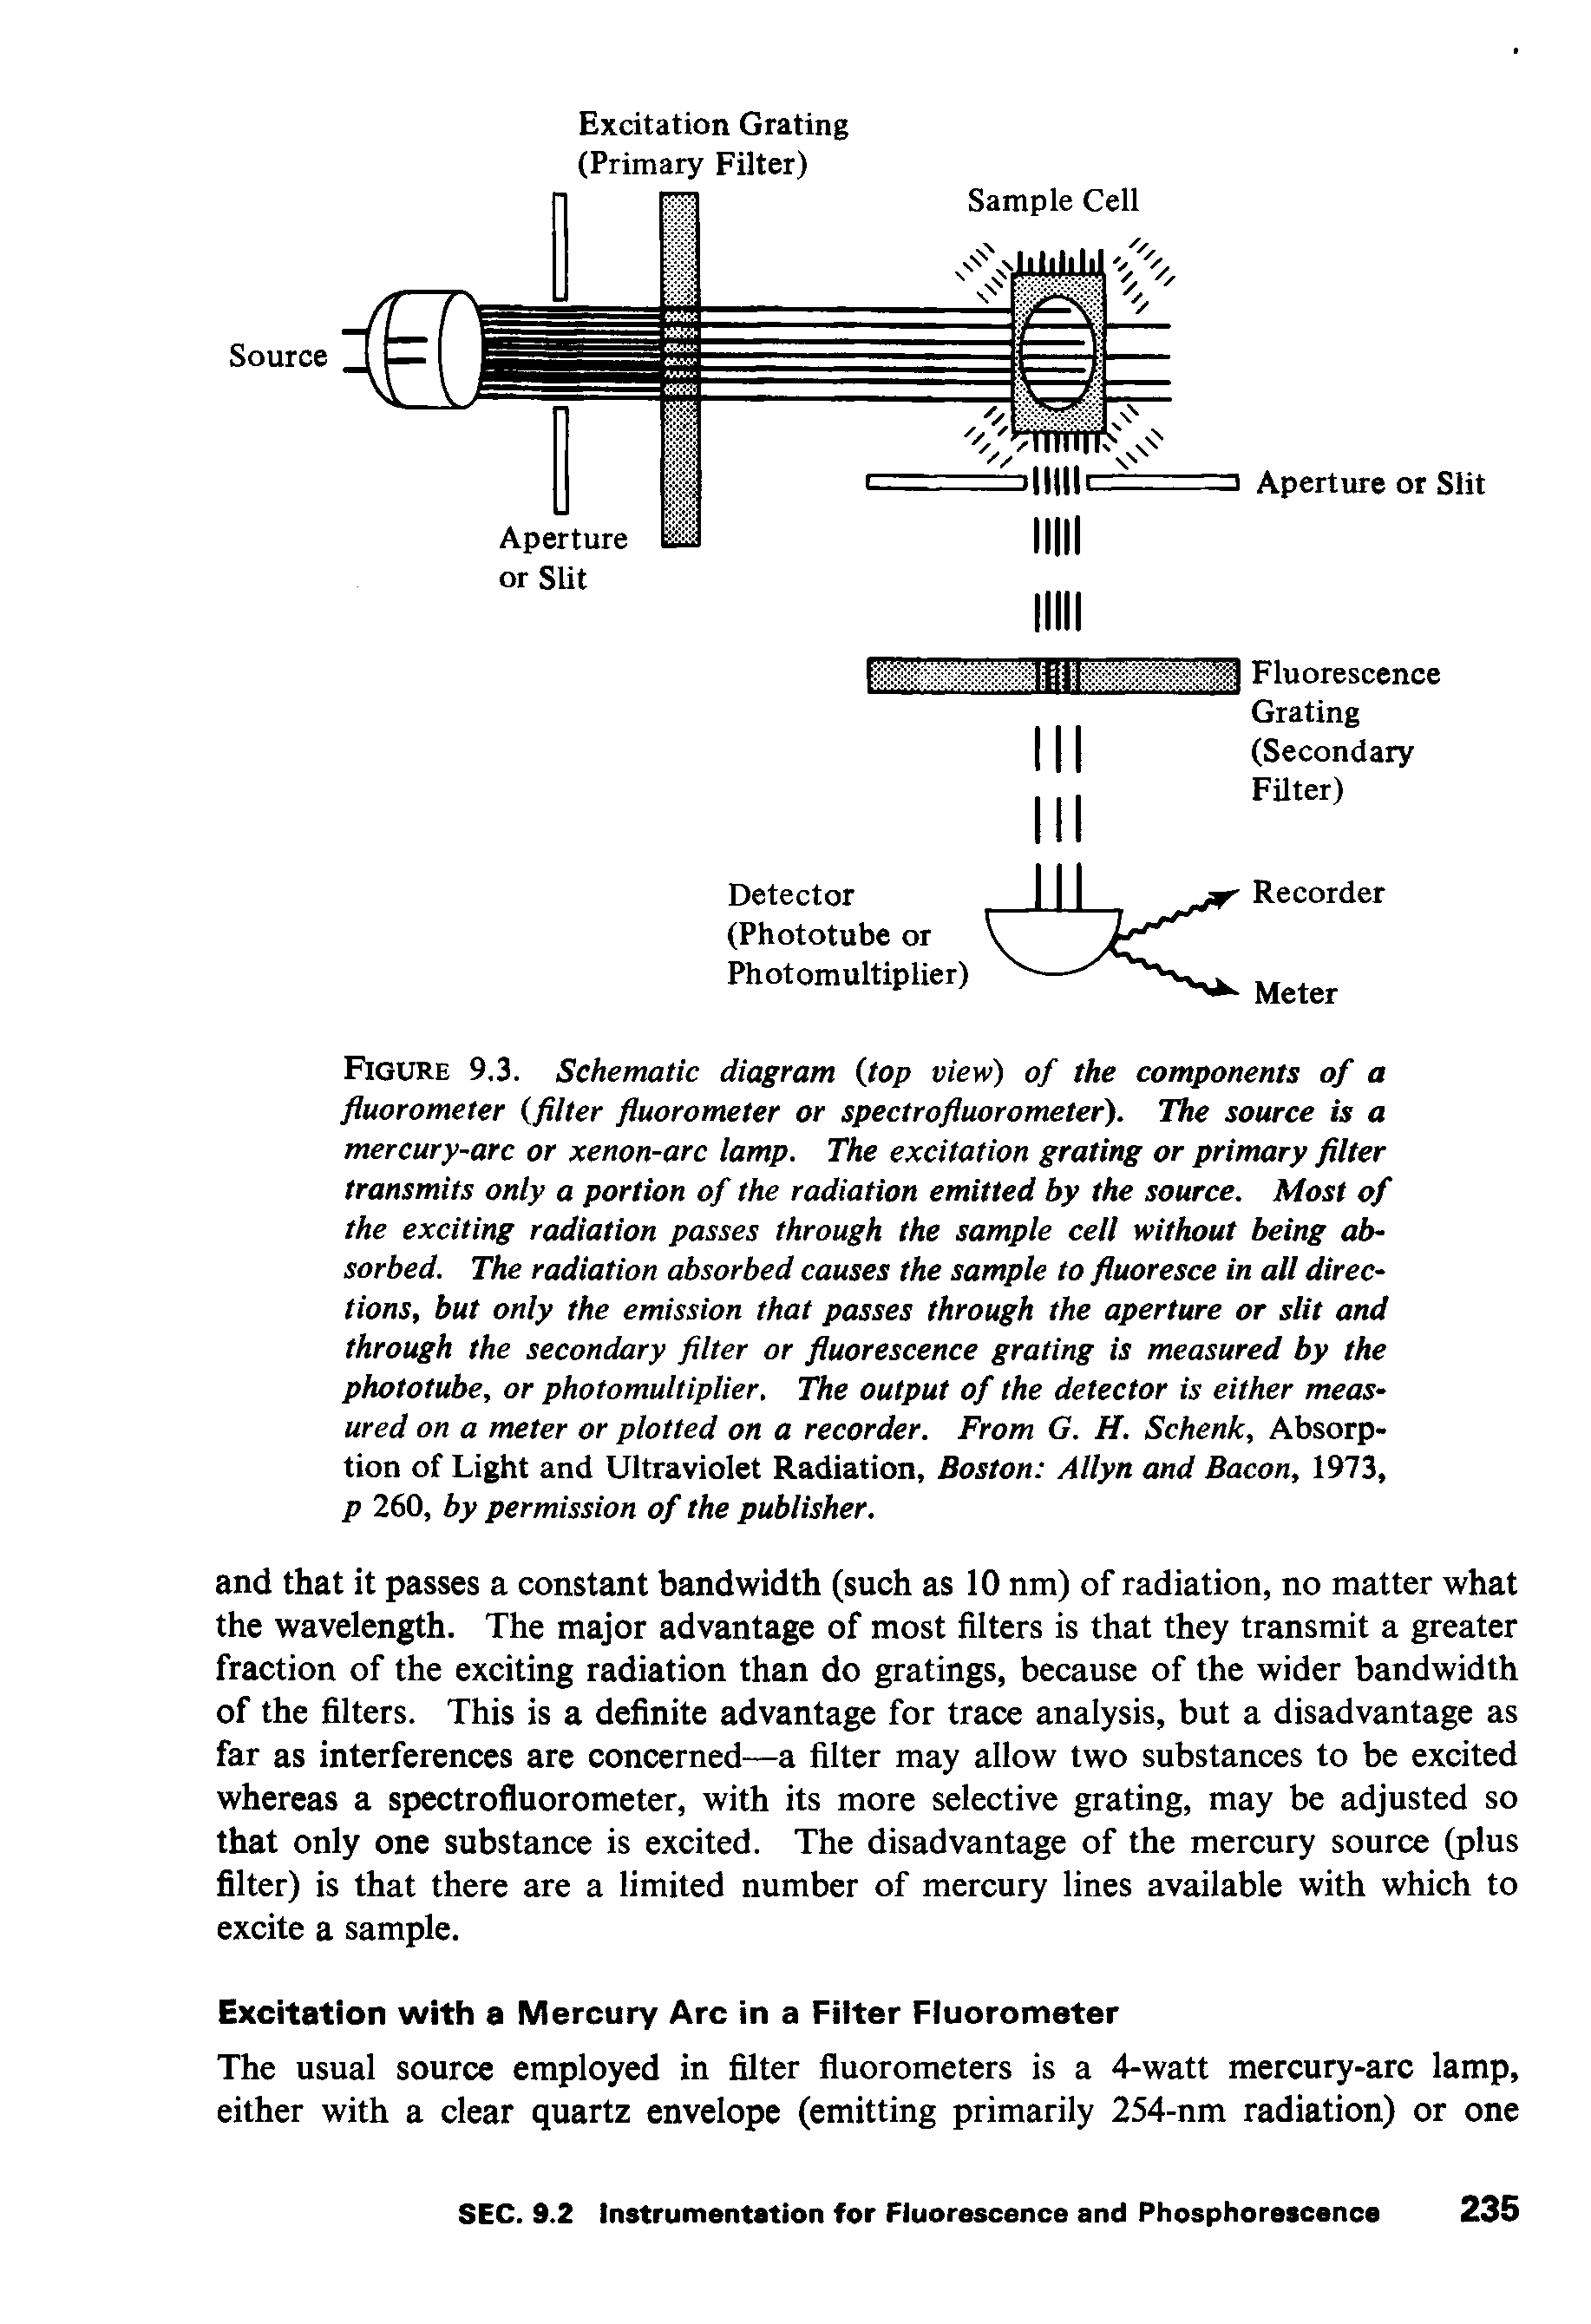 Figure 9.3. Schematic diagram (top view) of the components of a fluorometer (filter fluorometer or spectrofluorometer). The source is a mercury-arc or xenon-arc lamp. The excitation grating or primary filter transmits only a portion of the radiation emitted by the source. Most of the exciting radiation passes through the sample cell without being absorbed. The radiation absorbed causes the sample to fluoresce in all directions, but only the emission that passes through the aperture or slit and through the secondary filter or fluorescence grating is measured by the phototube, or photomultiplier. The output of the detector is either measured on a meter or plotted on a recorder. From G. H. Schenk, Absorption of Light and Ultraviolet Radiation, Boston Allyn and Bacon, 1973, p 260, by permission of the publisher.